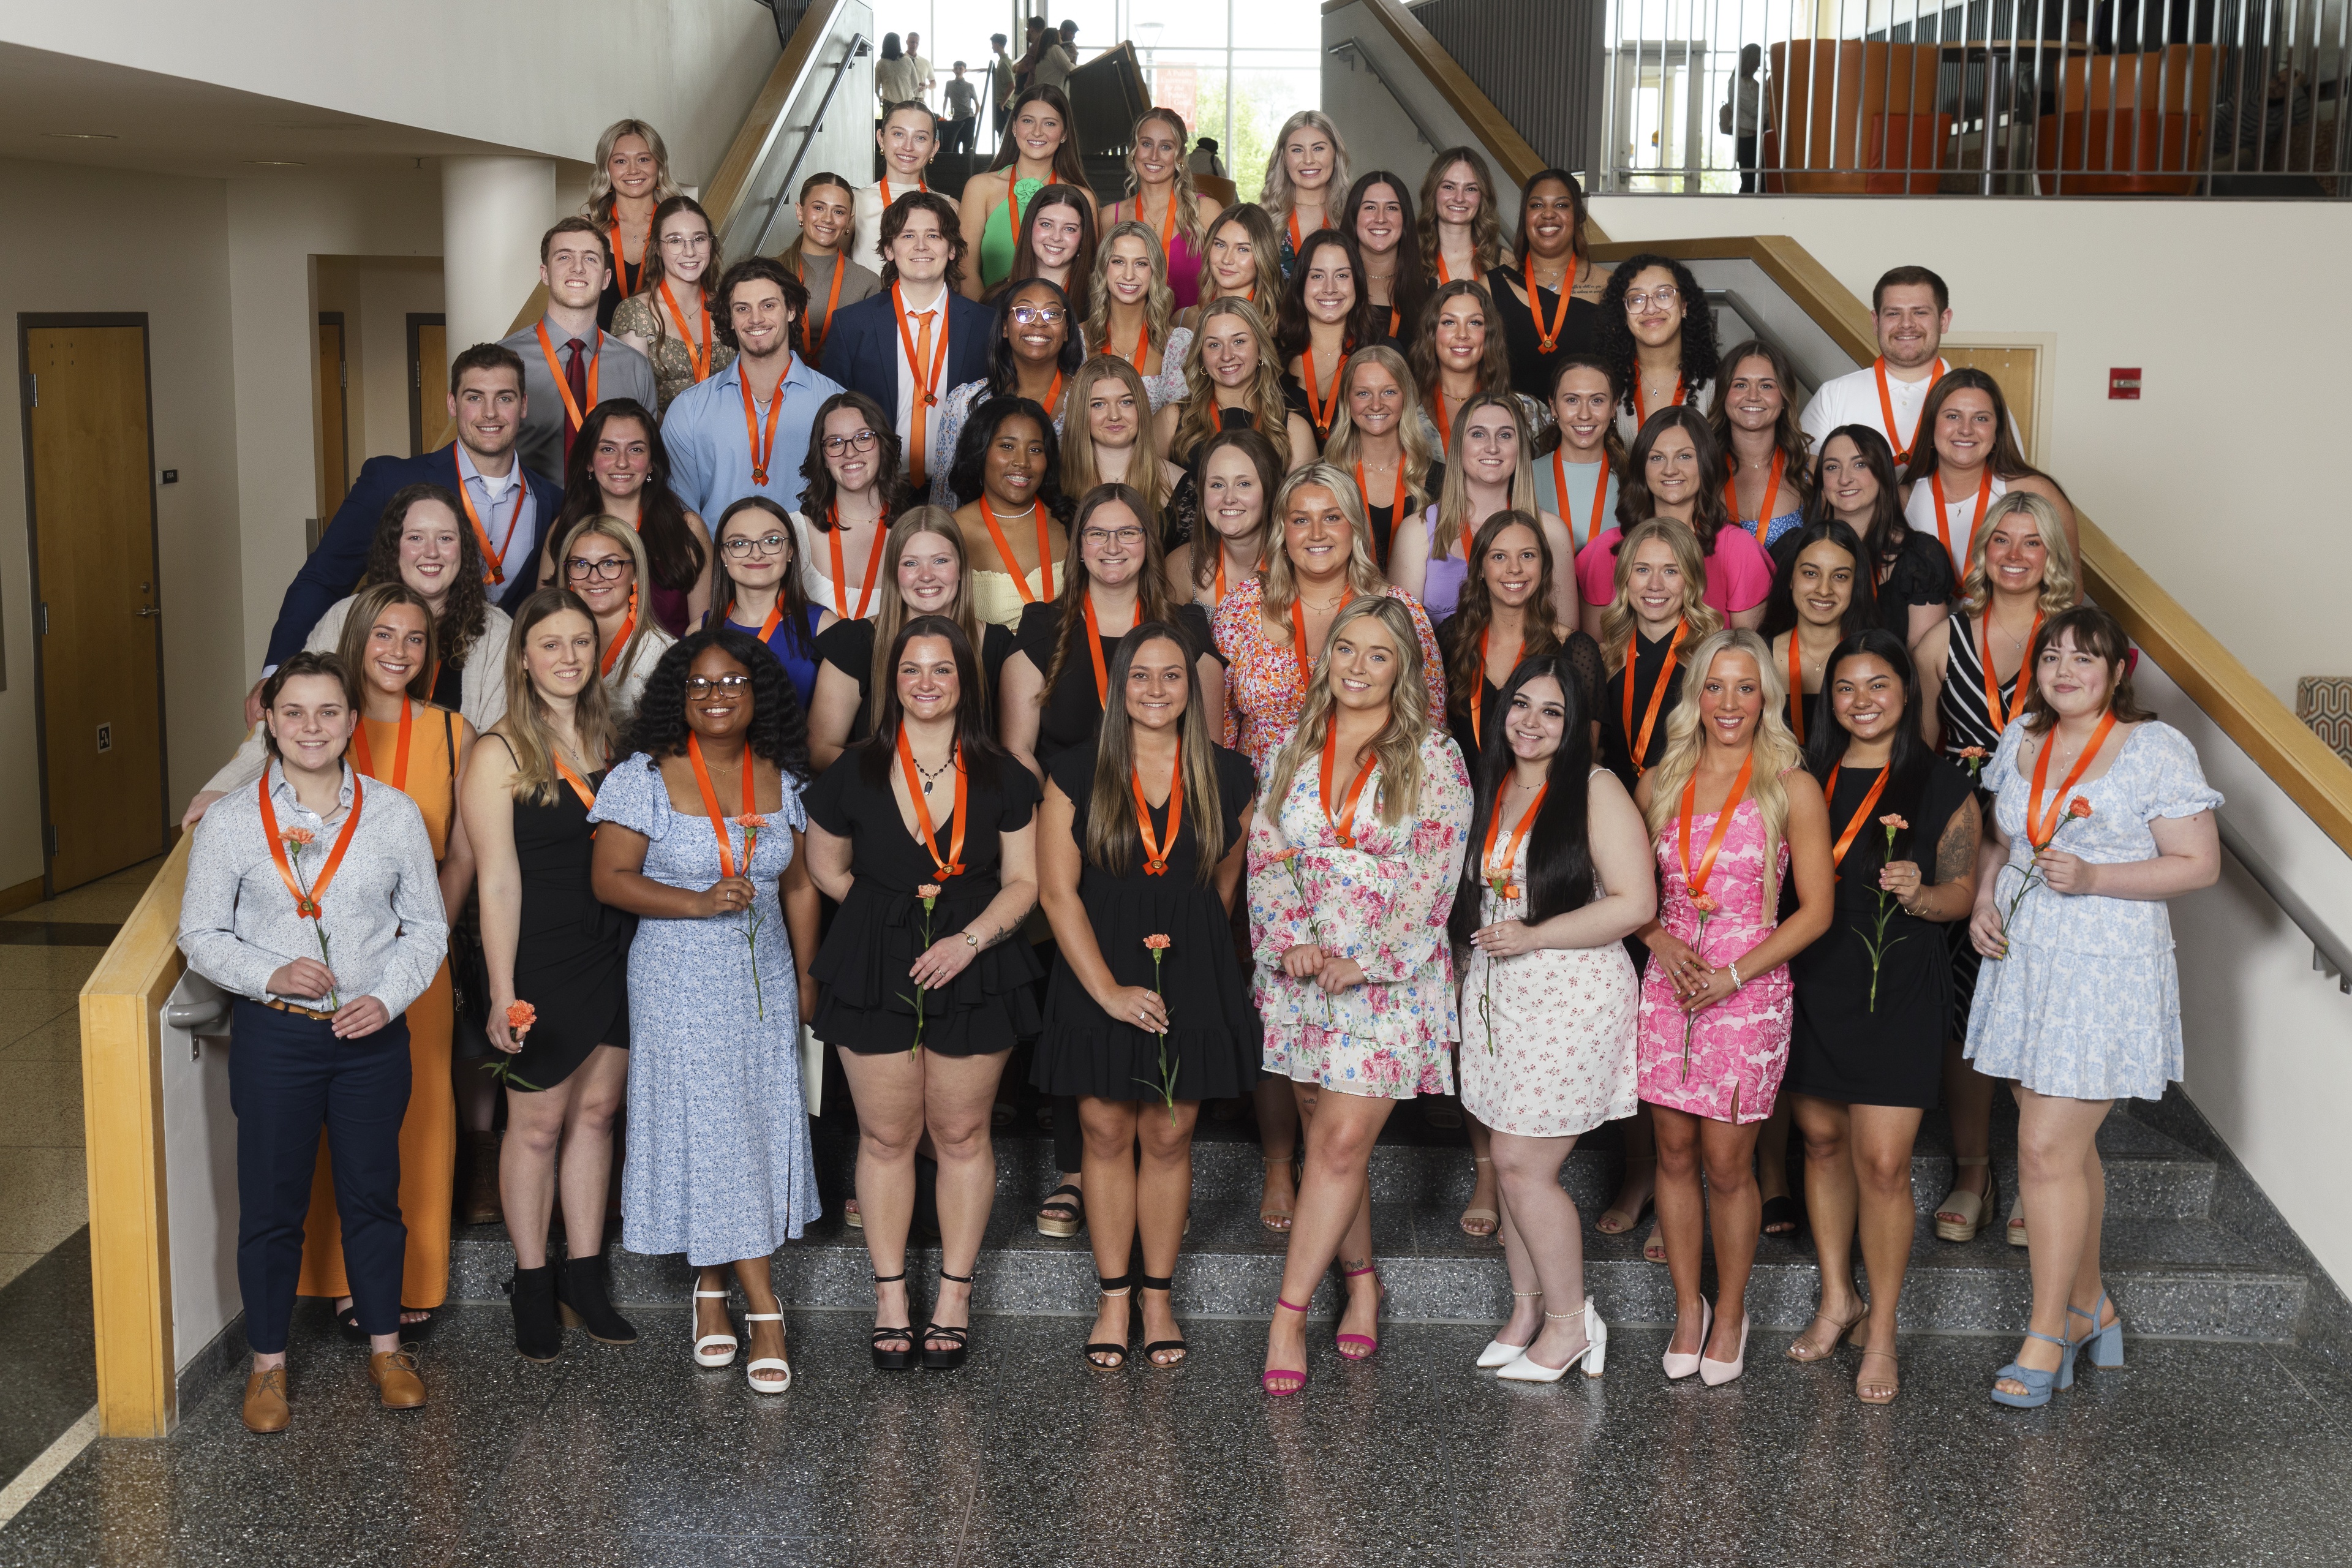  A group of BGSU nursing students stand on the stairs in the Bowen-Thompson Student Union.